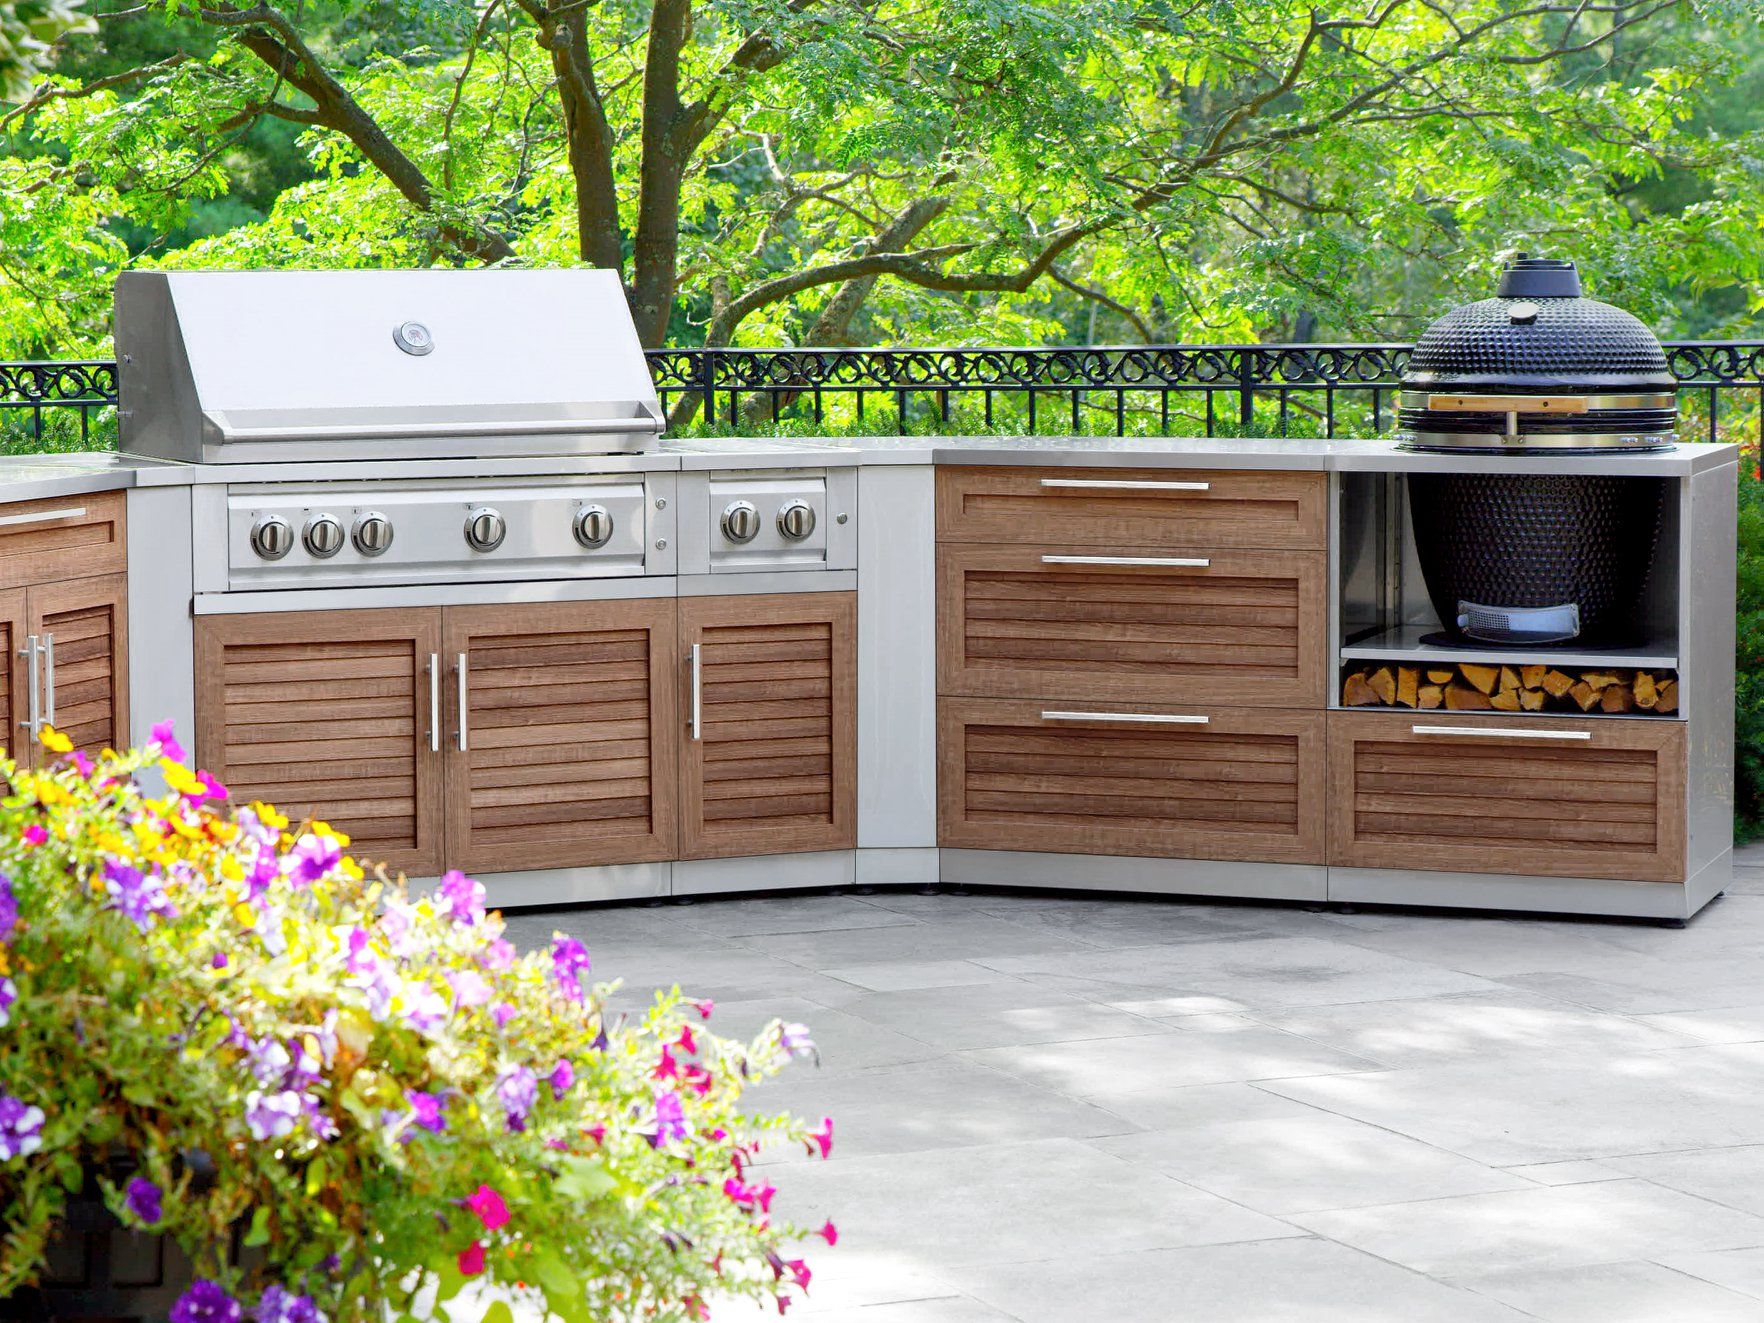 New Age Outdoor Kitchen SWEETYHOMEE